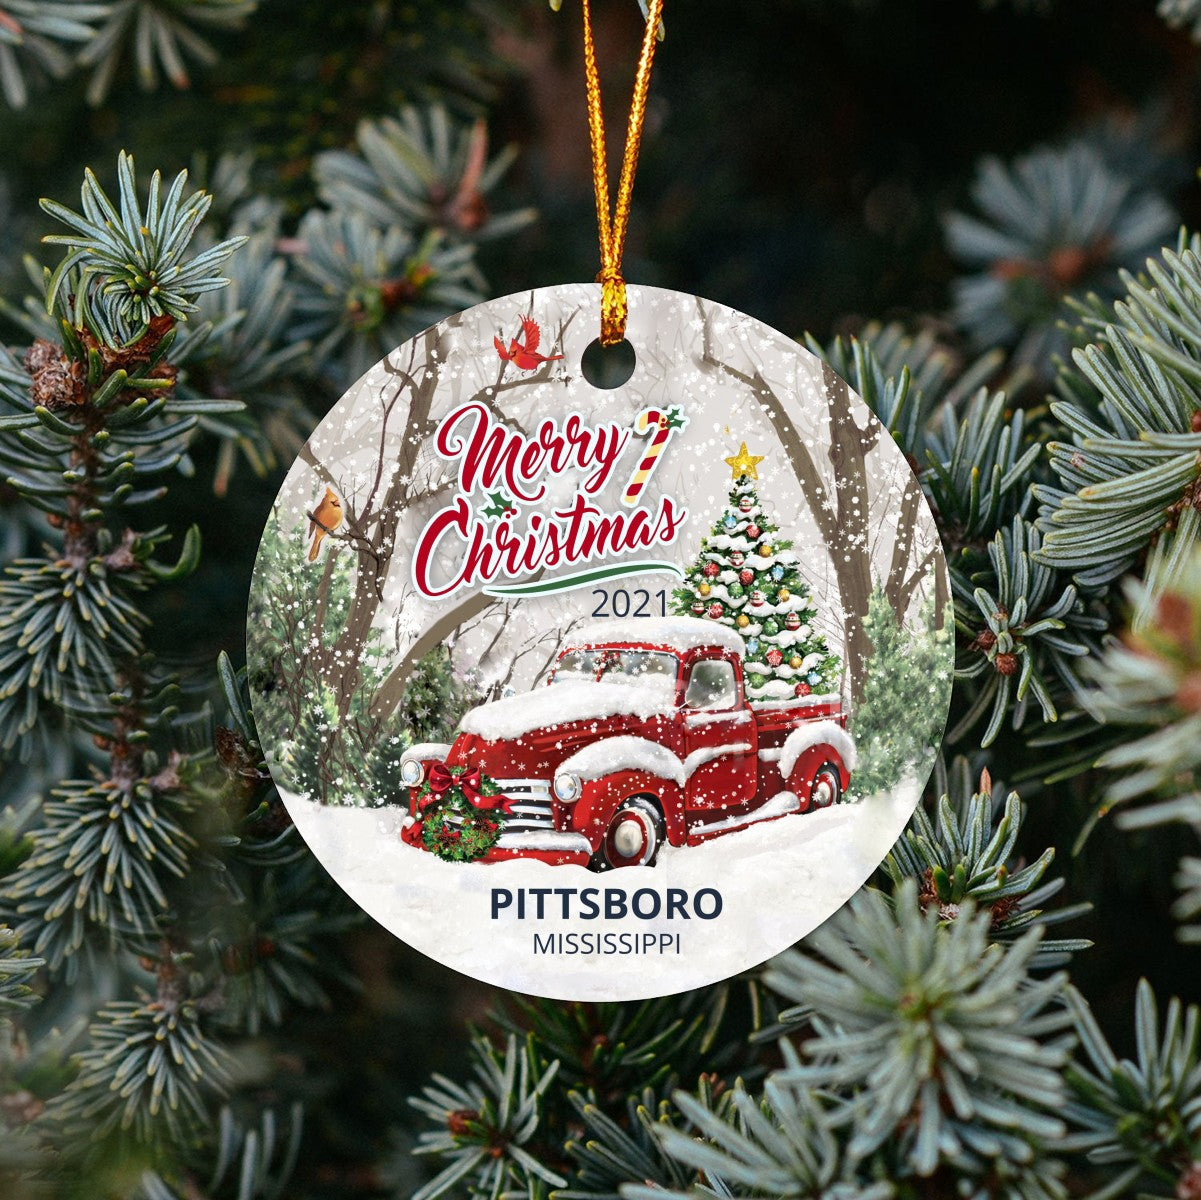 Christmas Tree Ornaments Pittsboro - Ornament With Name City, State Pittsboro Mississippi MS Ornament - Red Truck Xmas Ornaments 3'' Plastic Gift For Family, Friend And Housewarming